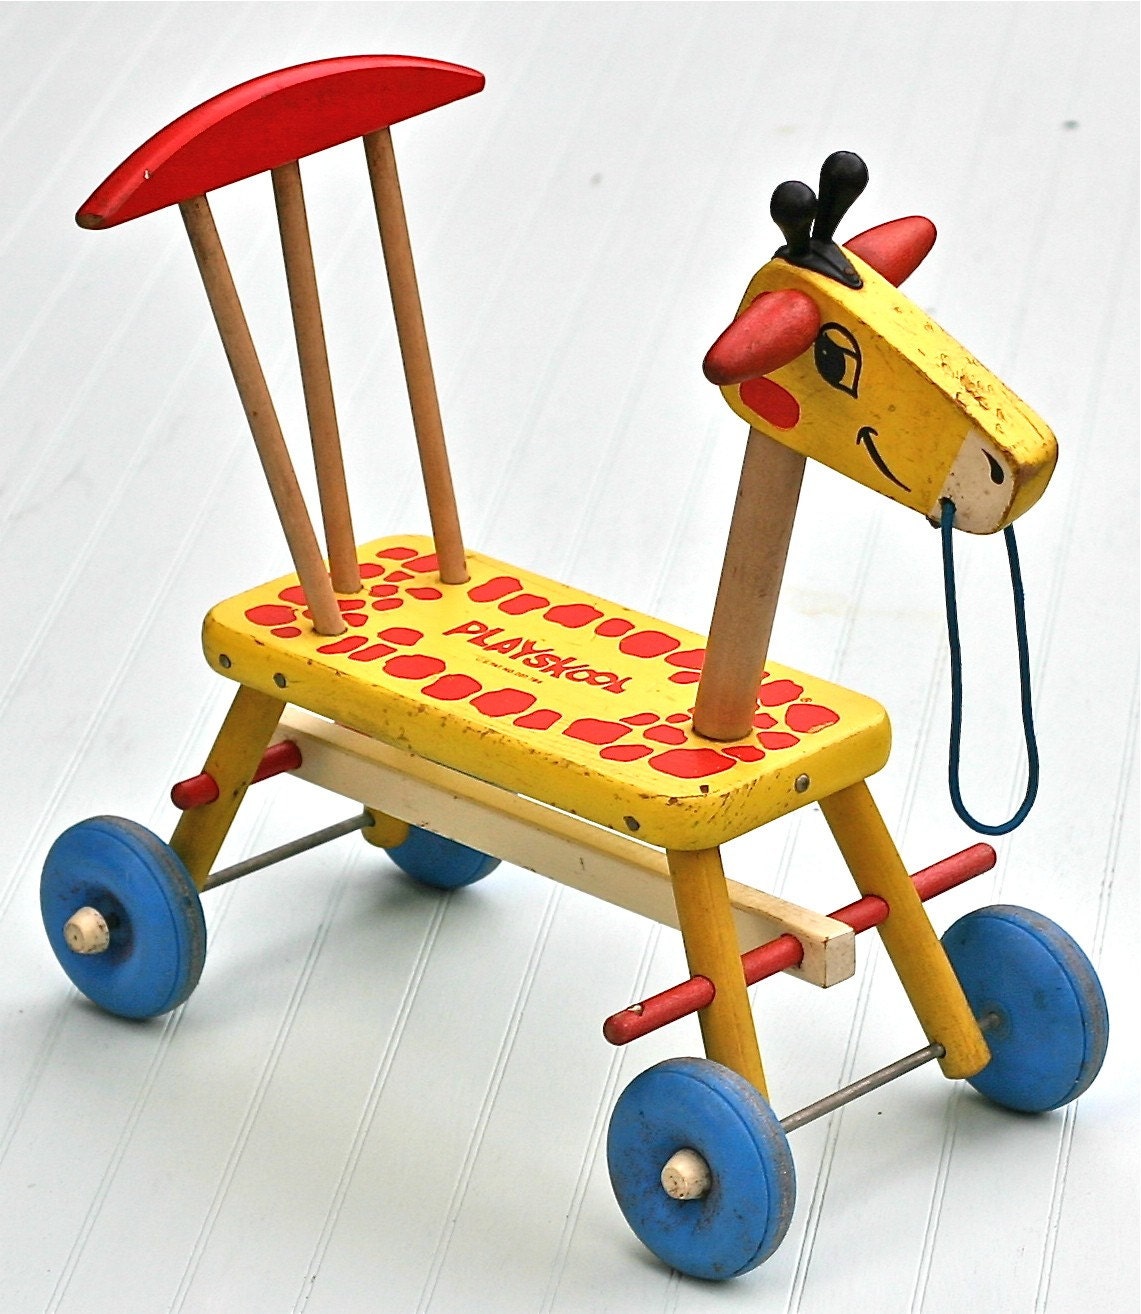 Wooden ride on toys uk